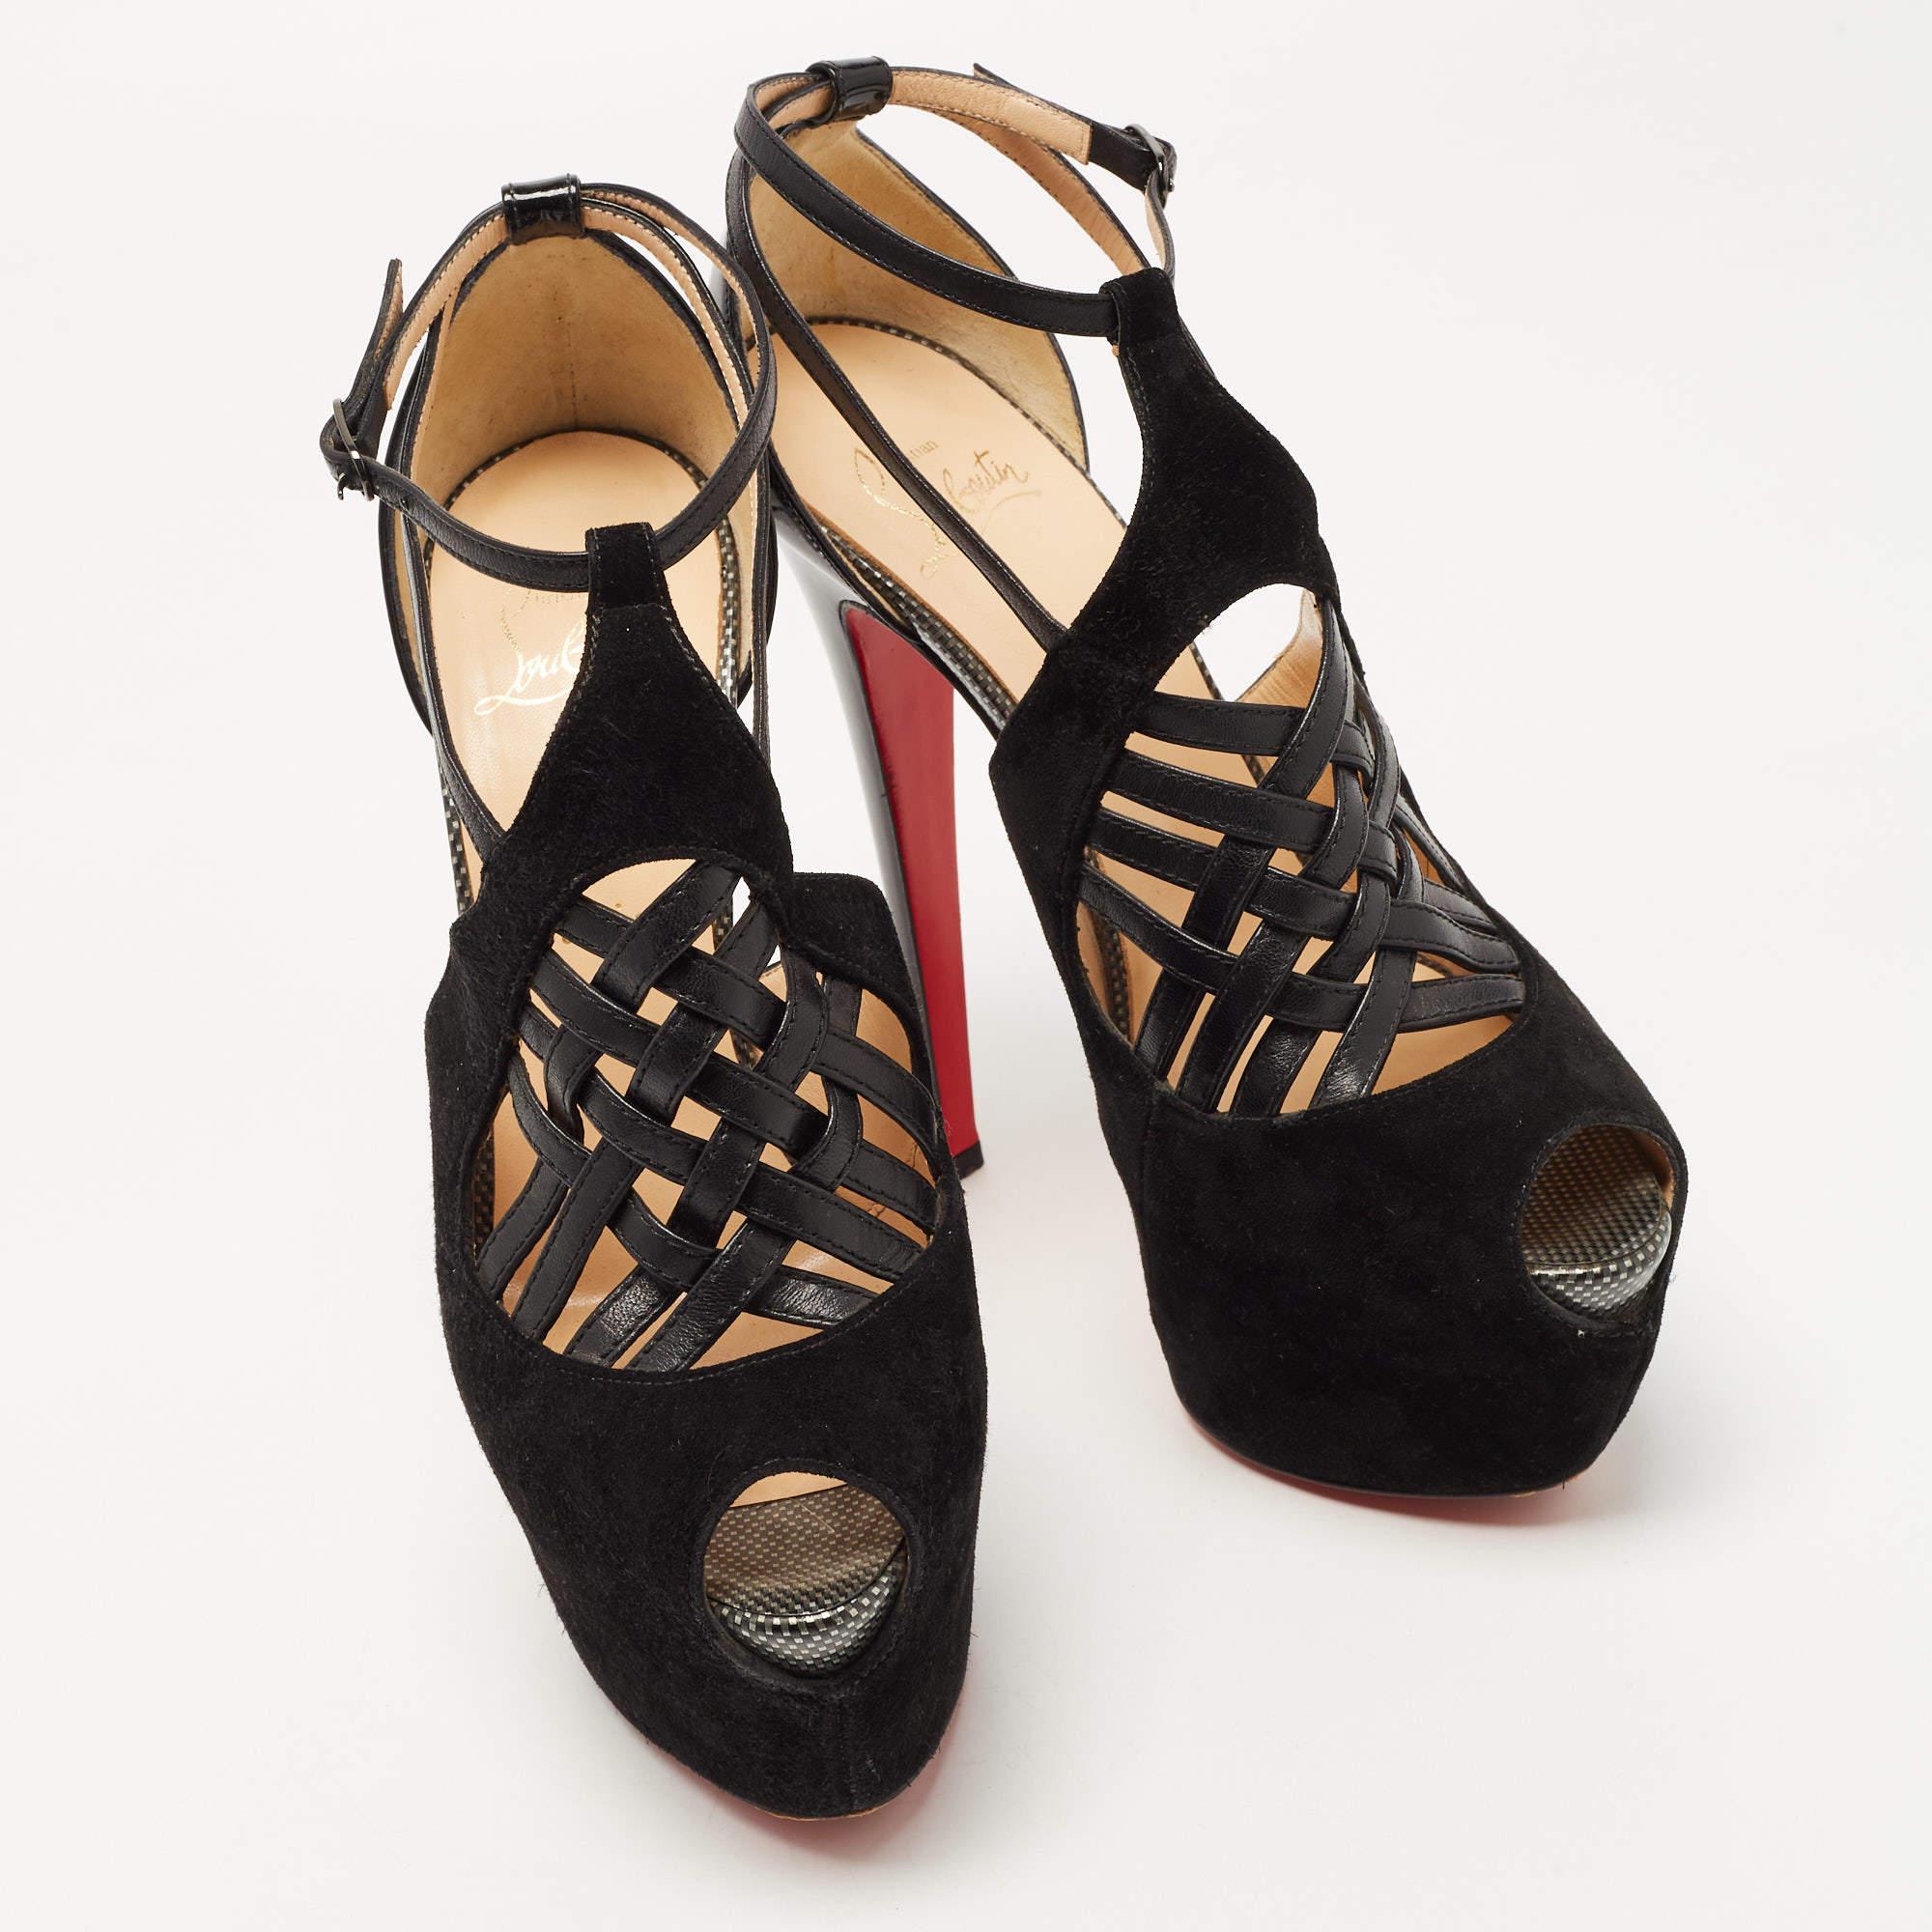 Christian Louboutin Black Suede and Leather Carlota Sandals Size 38 For Sale 1